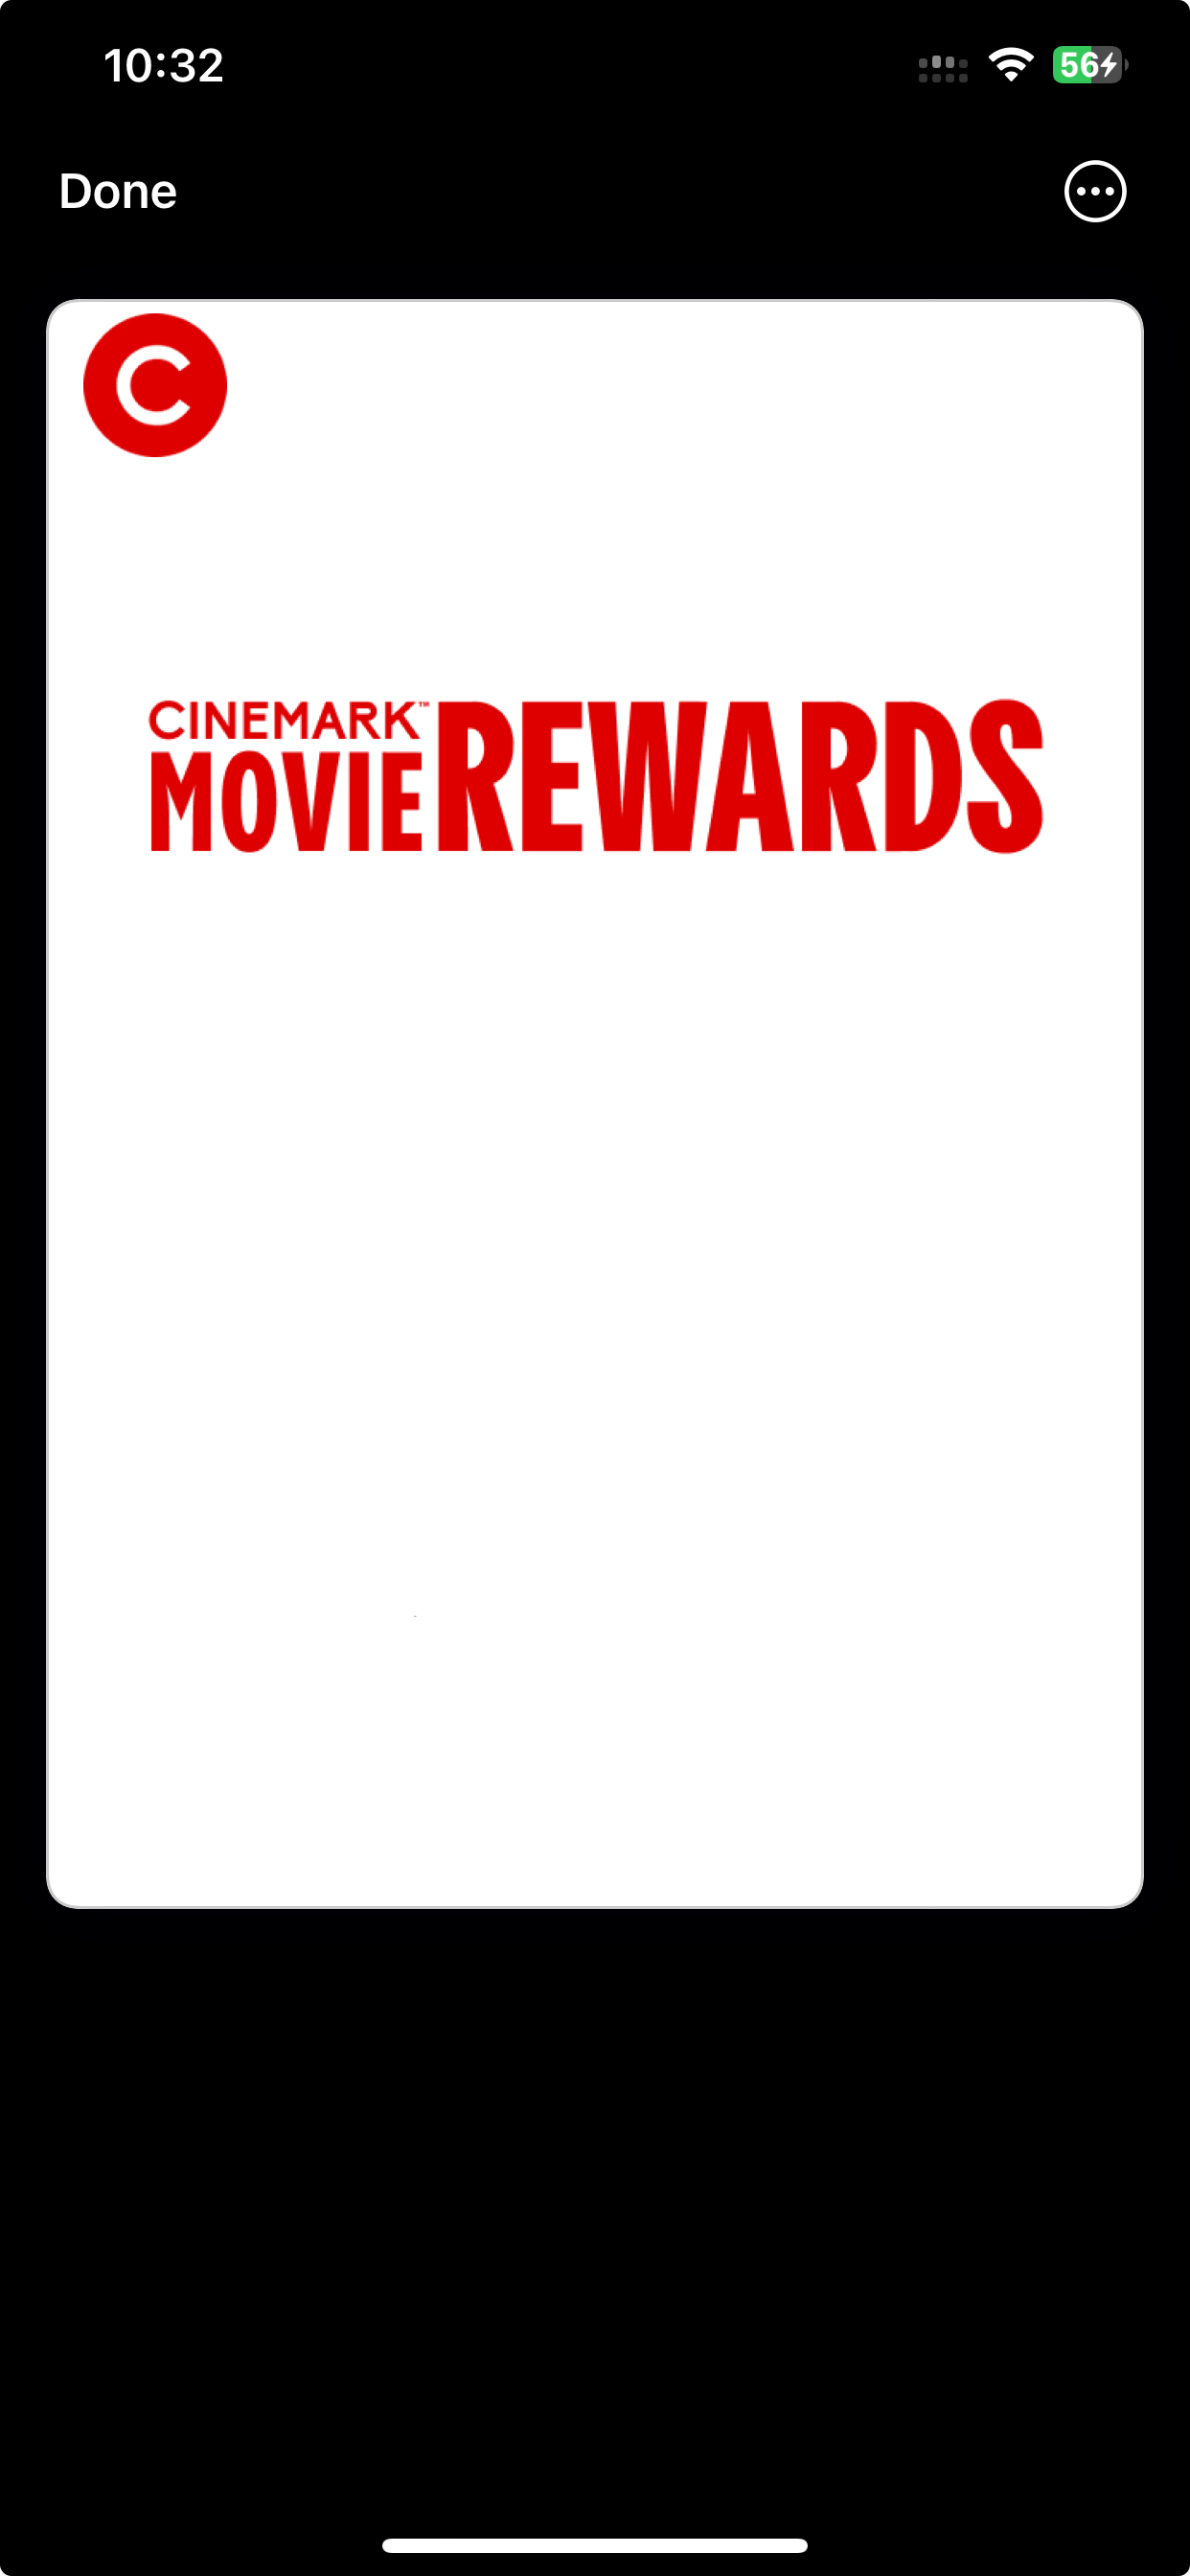 Cinemark supports Apple Wallet for its rewards card.